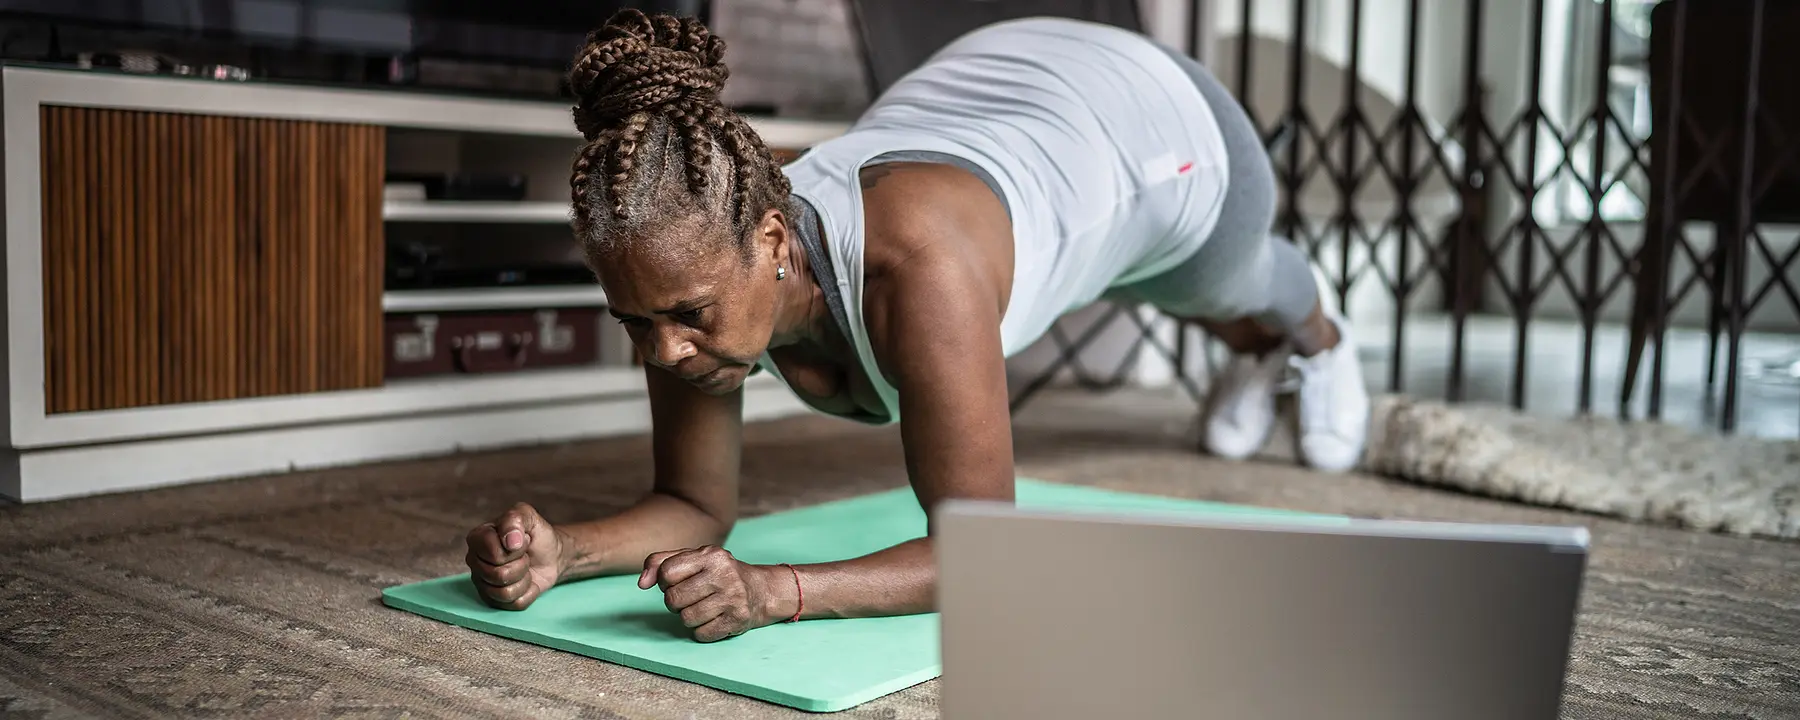 Women exercising on a mat next to her computer